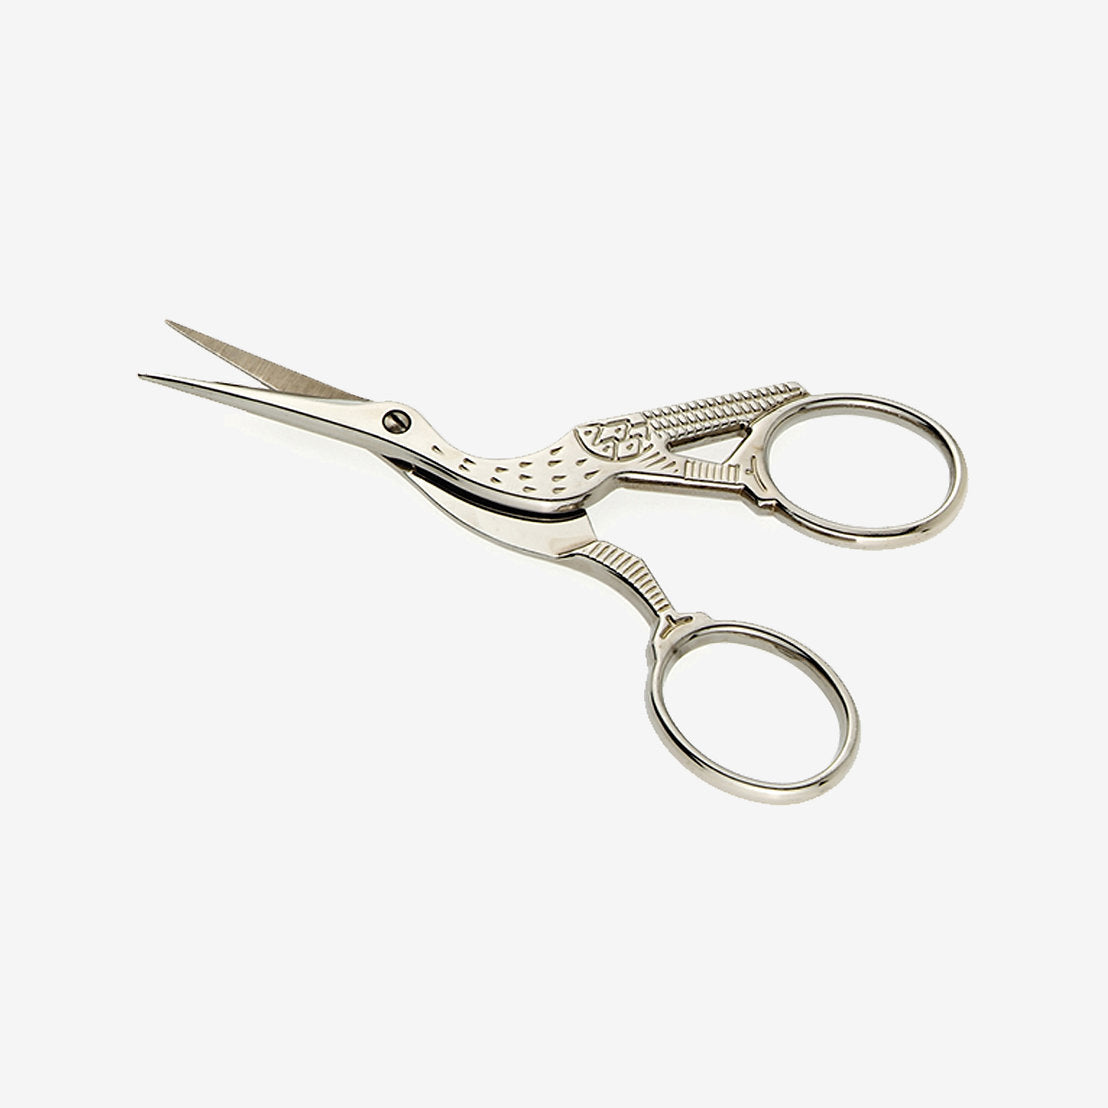 Prym stainless steel embroidery scissors